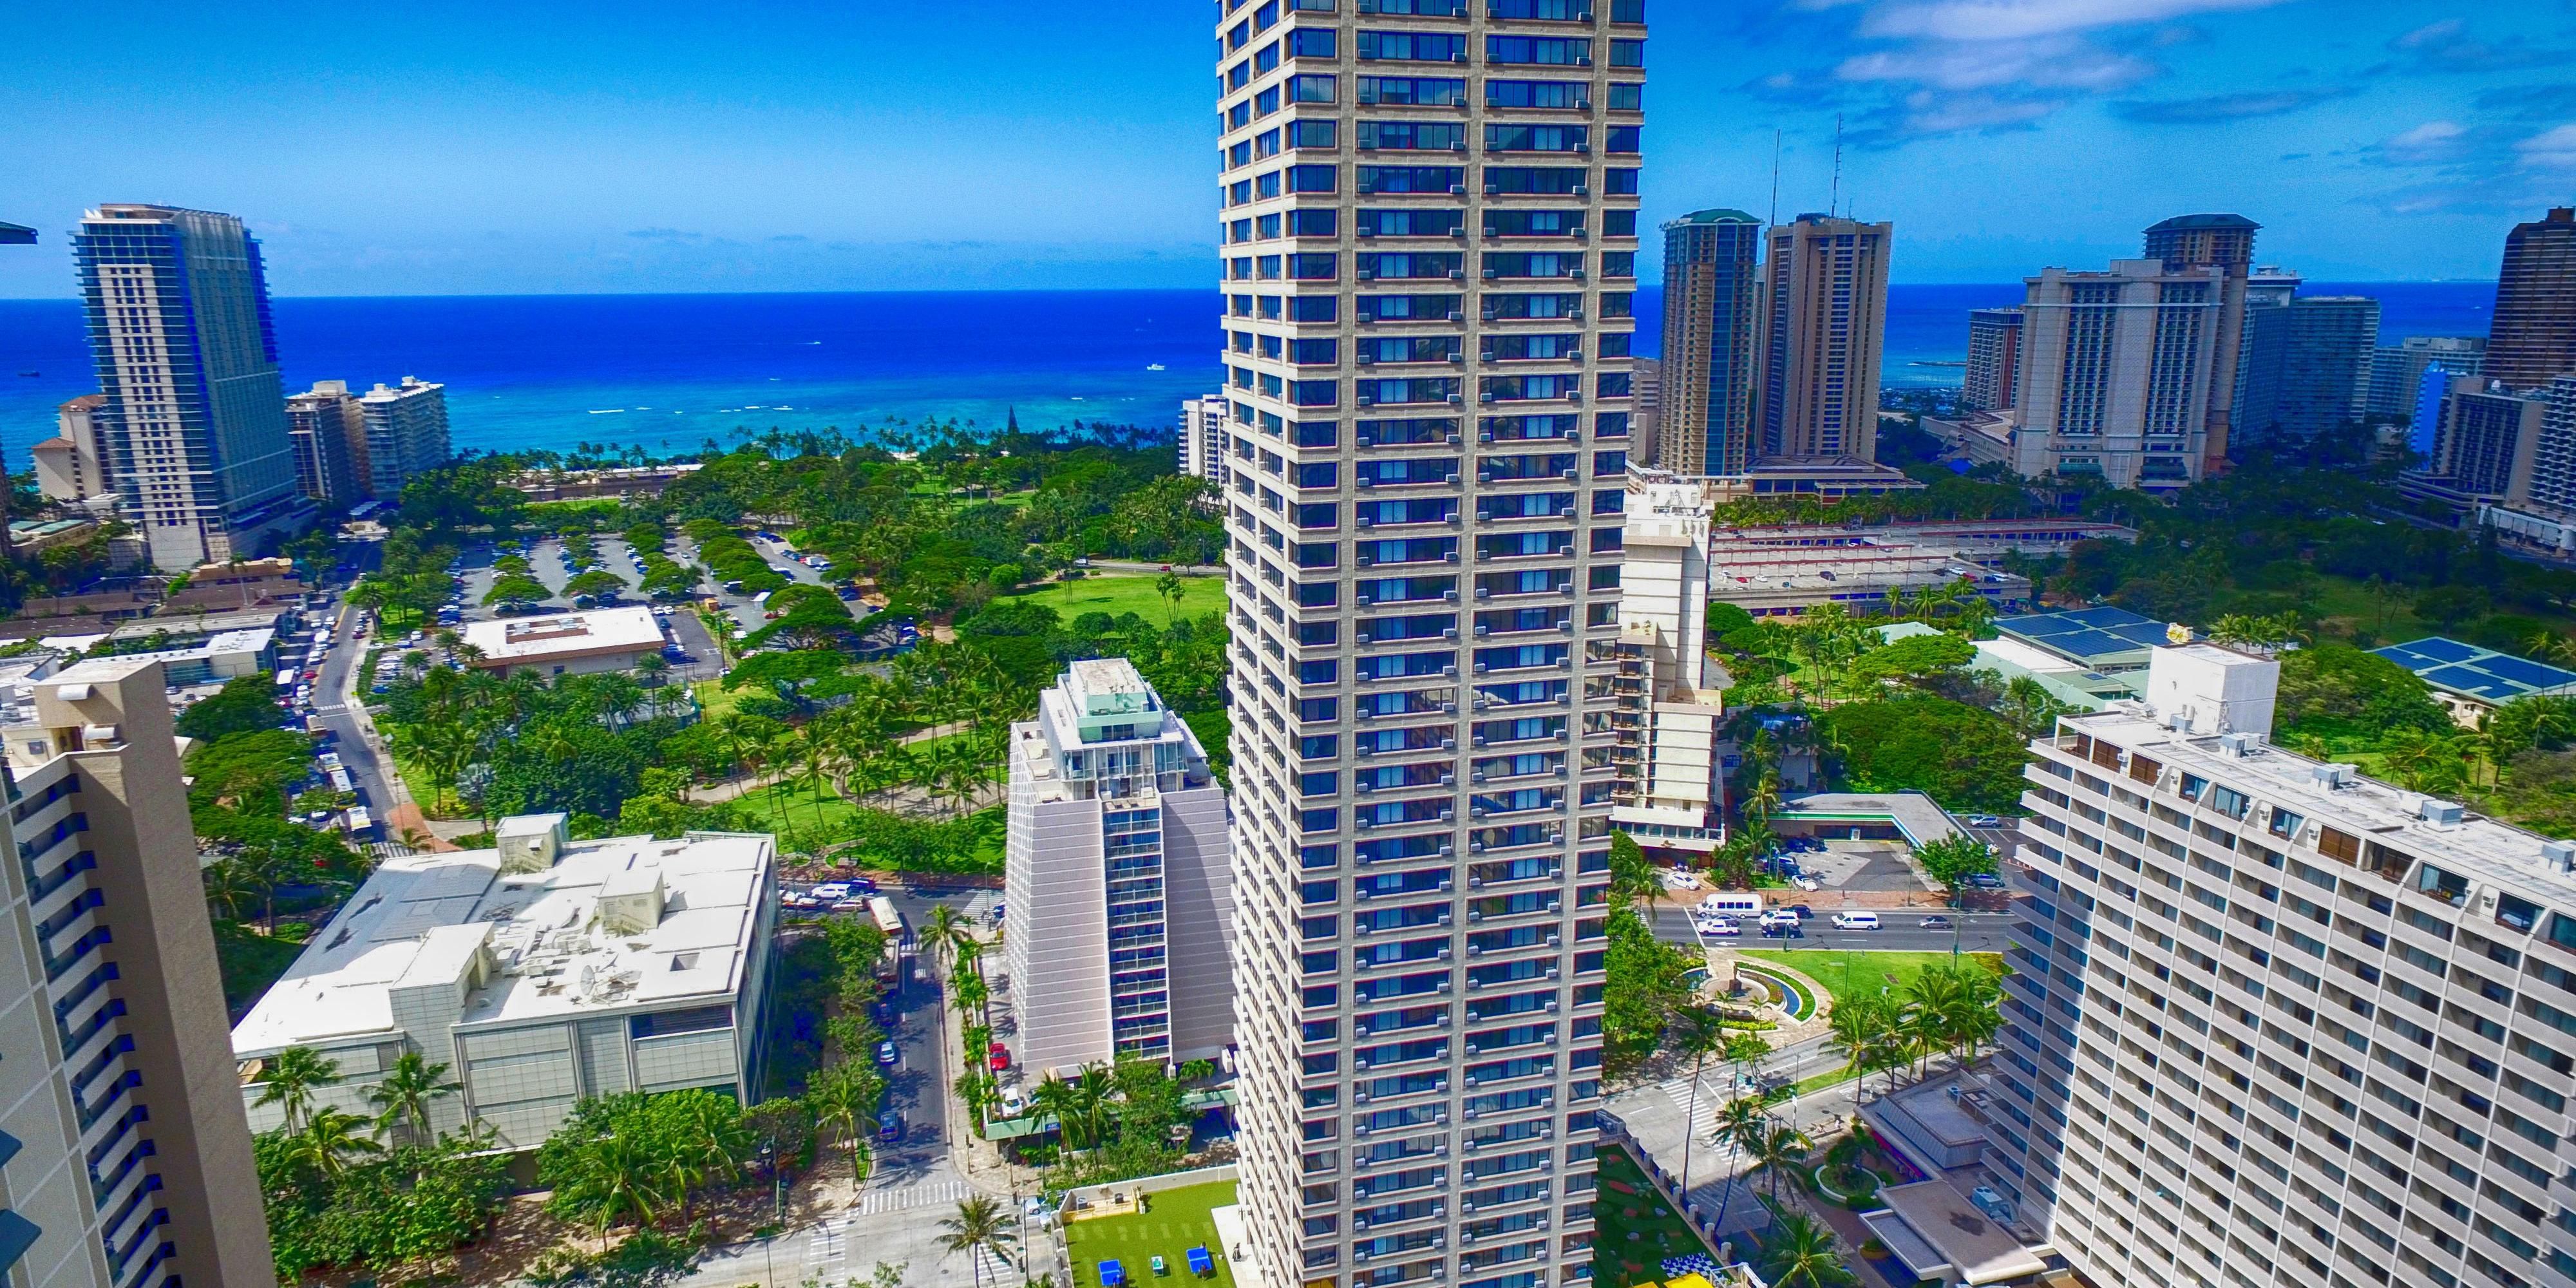 Enjoy our views from the top. All of our oceanfront suites enjoy a spectacular view of downtown Waikiki and the world-famous Waikiki Beach.